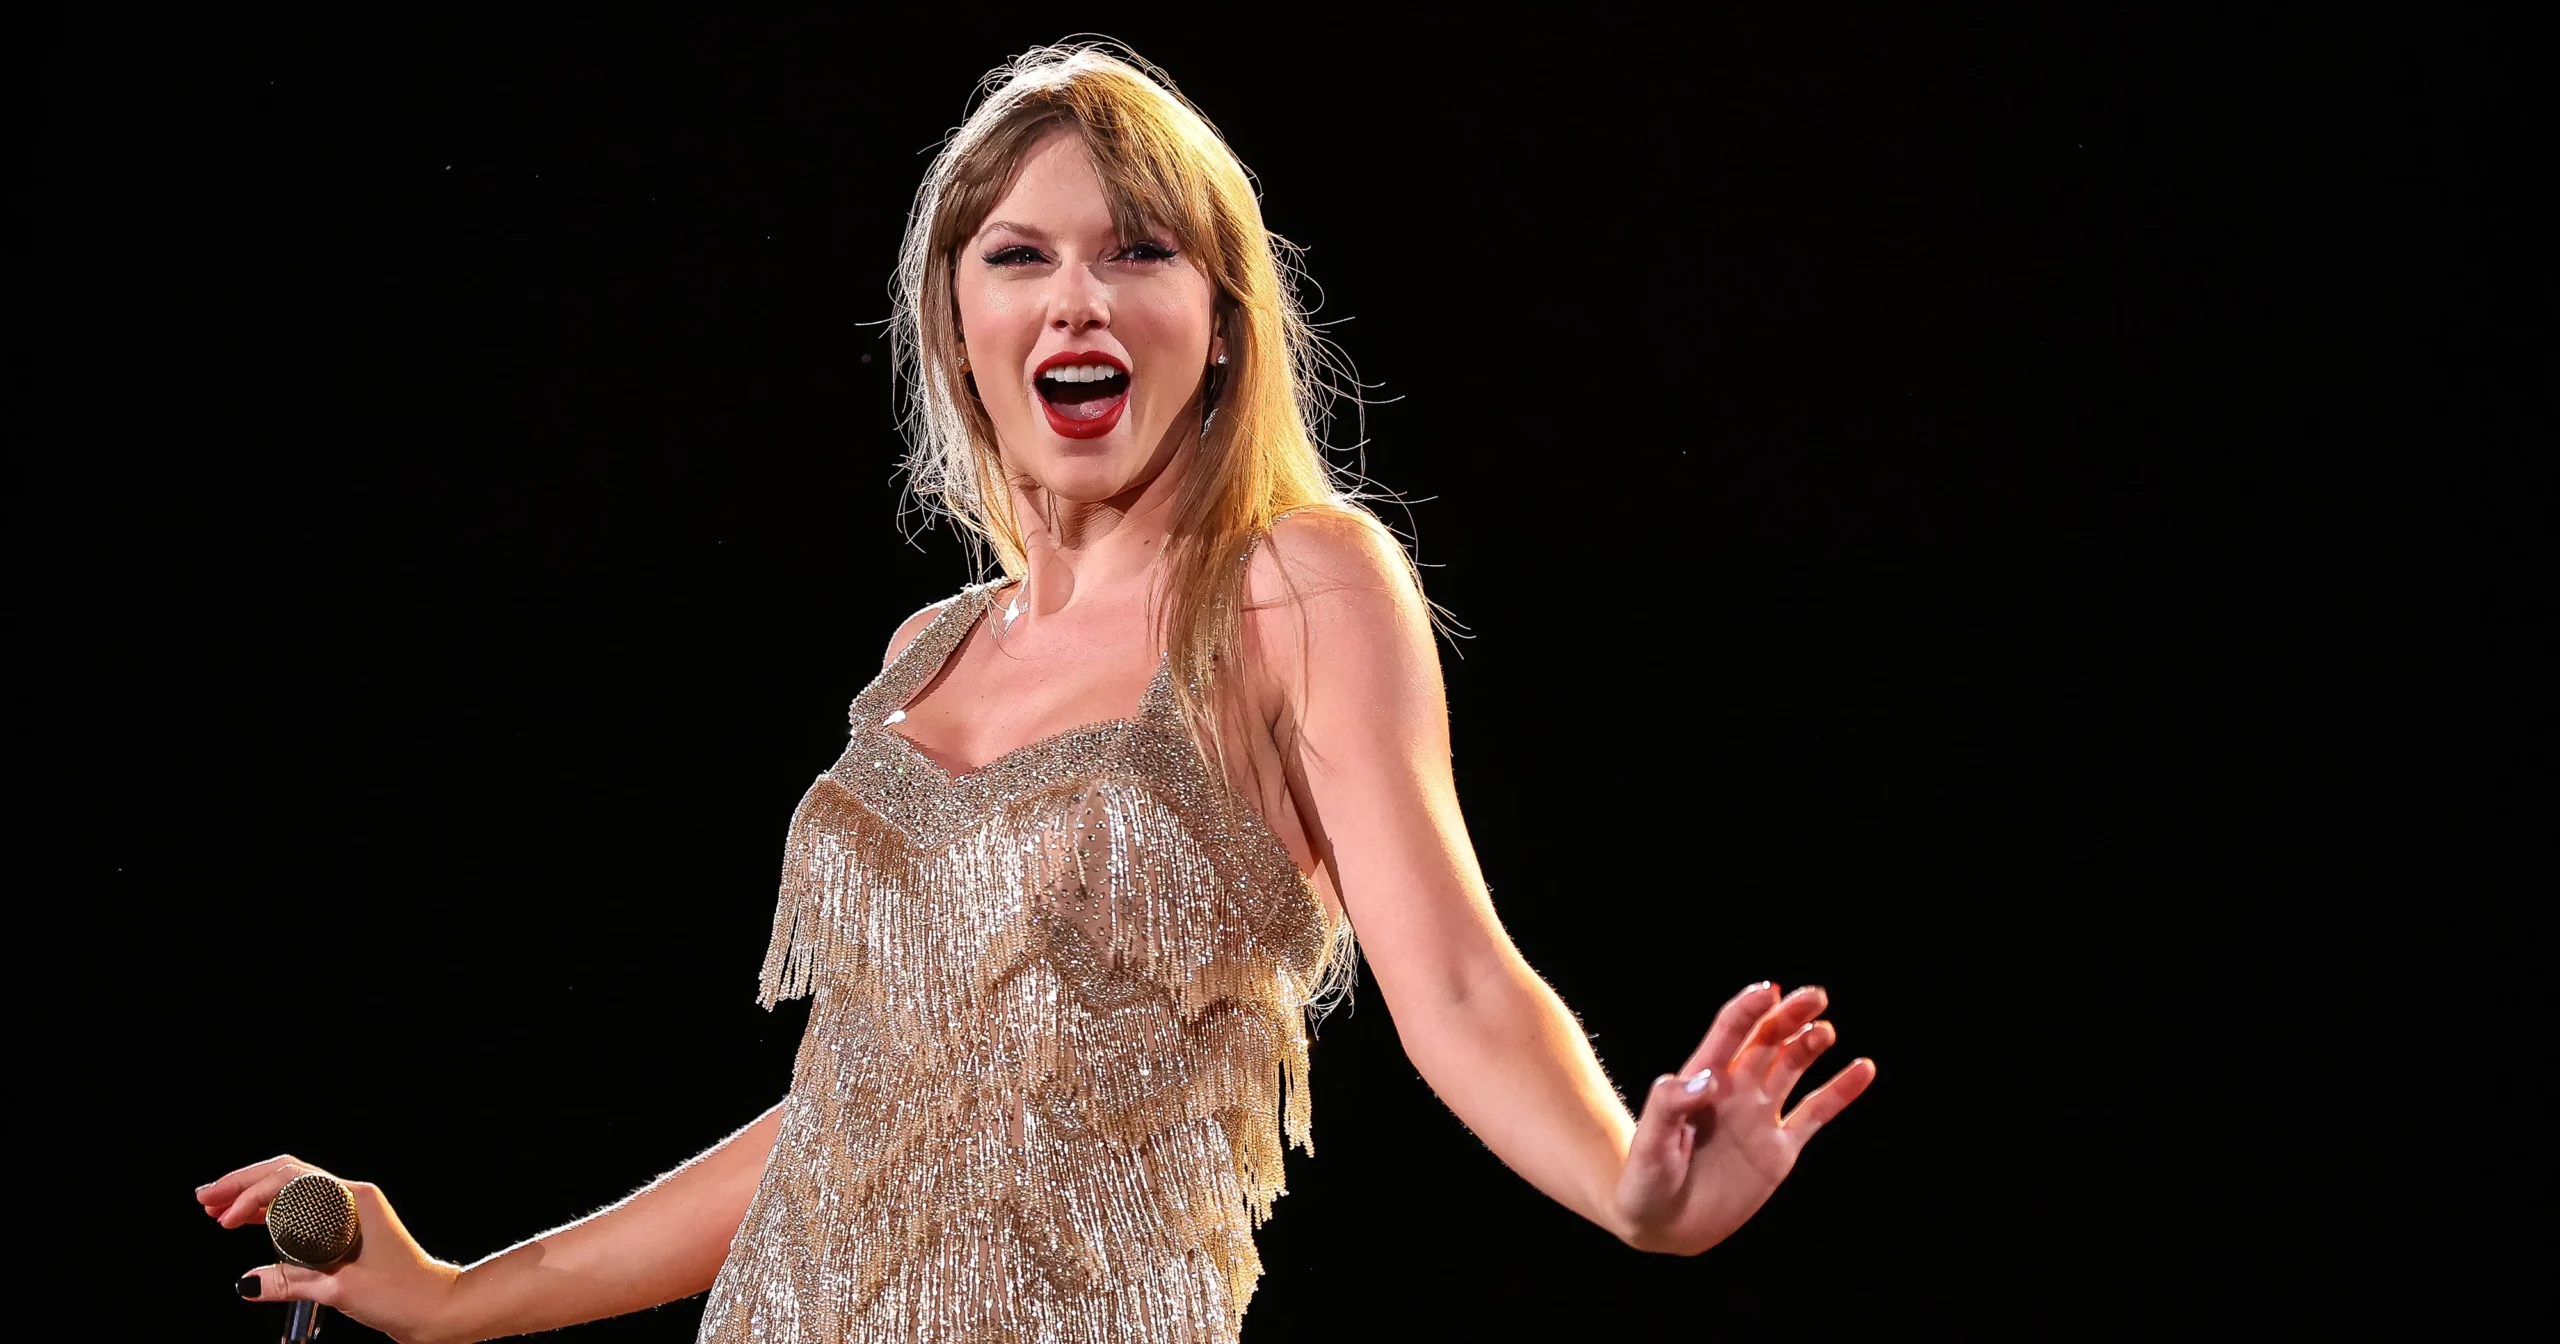 Taylor Swift's Reaction Upon Hearing a Fan's Pregnancy Announcement: "The Baby Wants to Meet Me?"